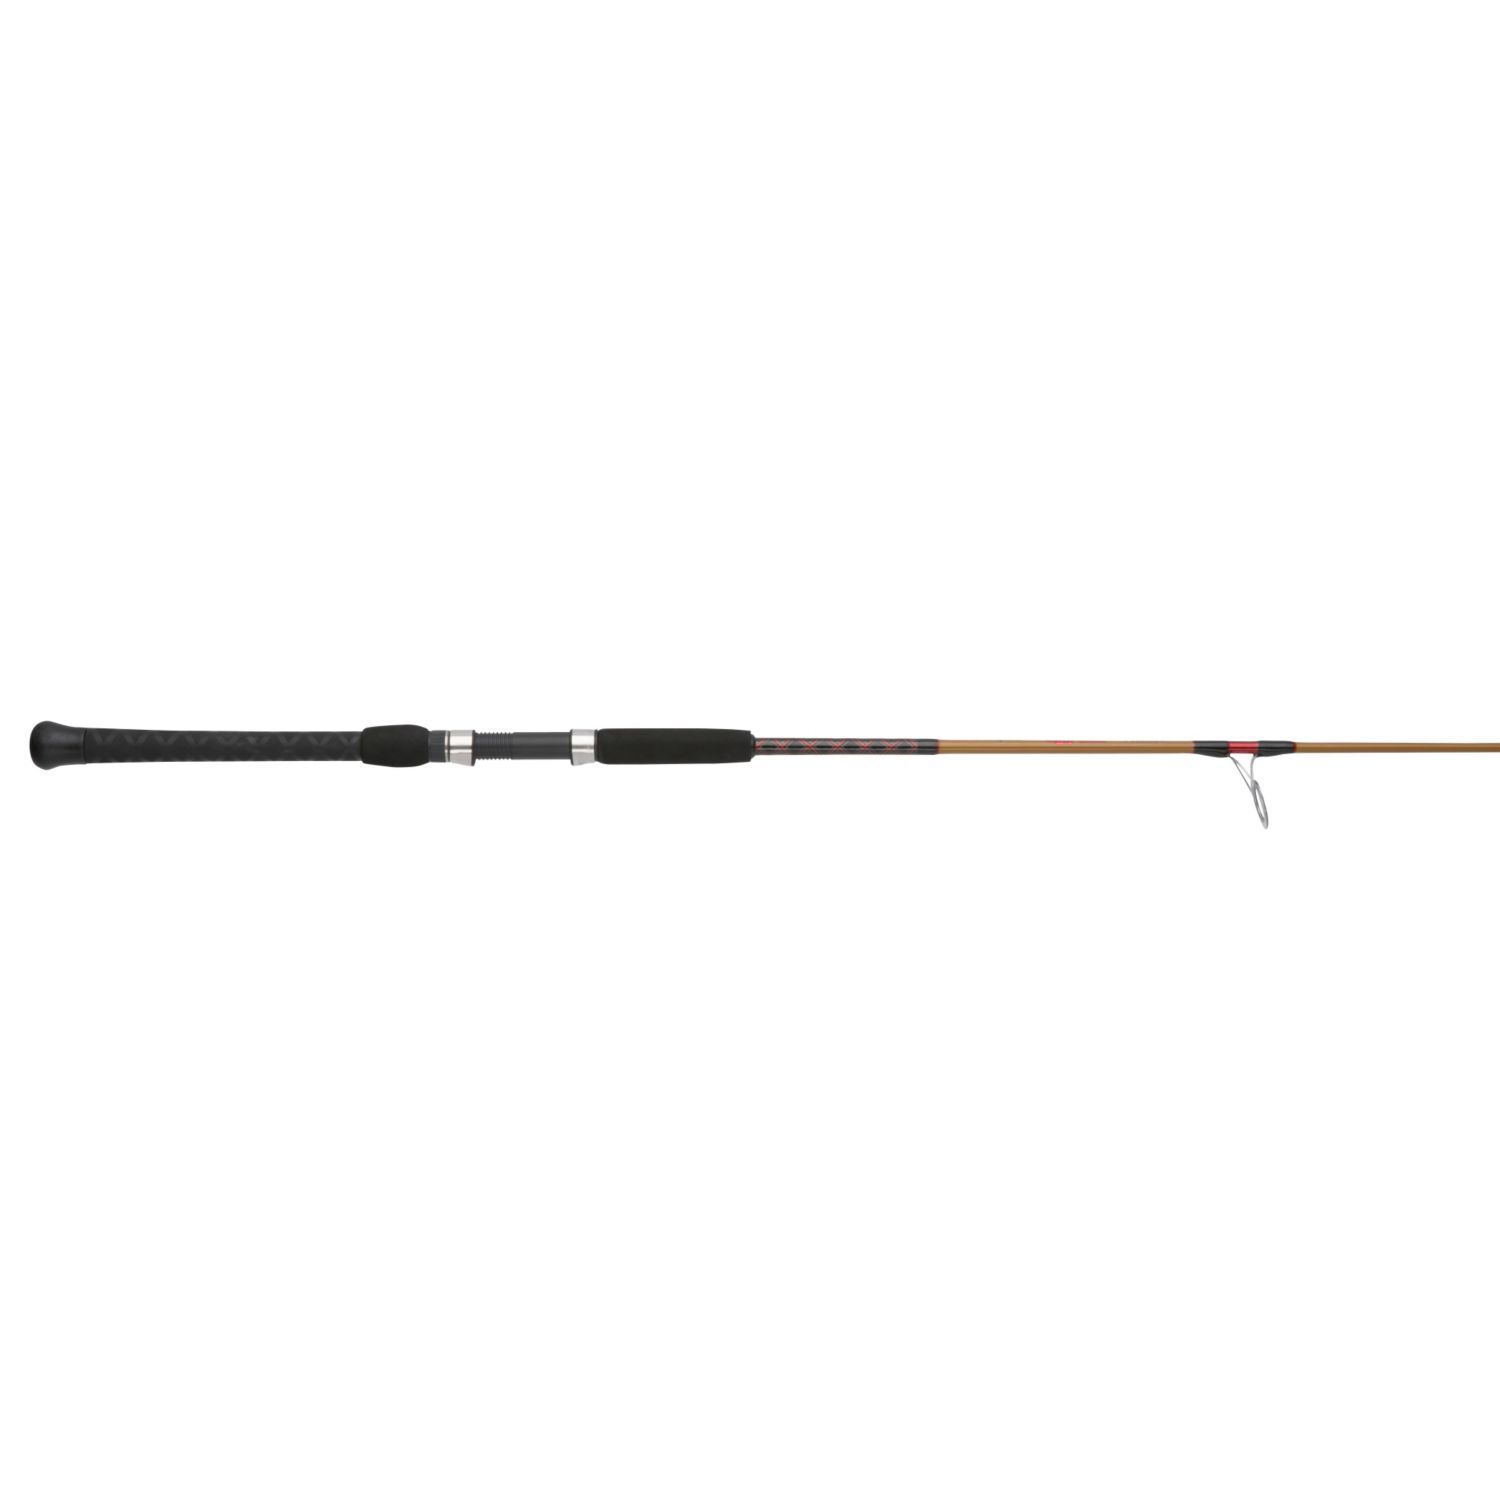 Ugly Stik Tiger Elite Spinning Rod - Nearshore/Offshore, Heavy Power,  14-40lb Line Rating, 1-5 oz. Lure Rating